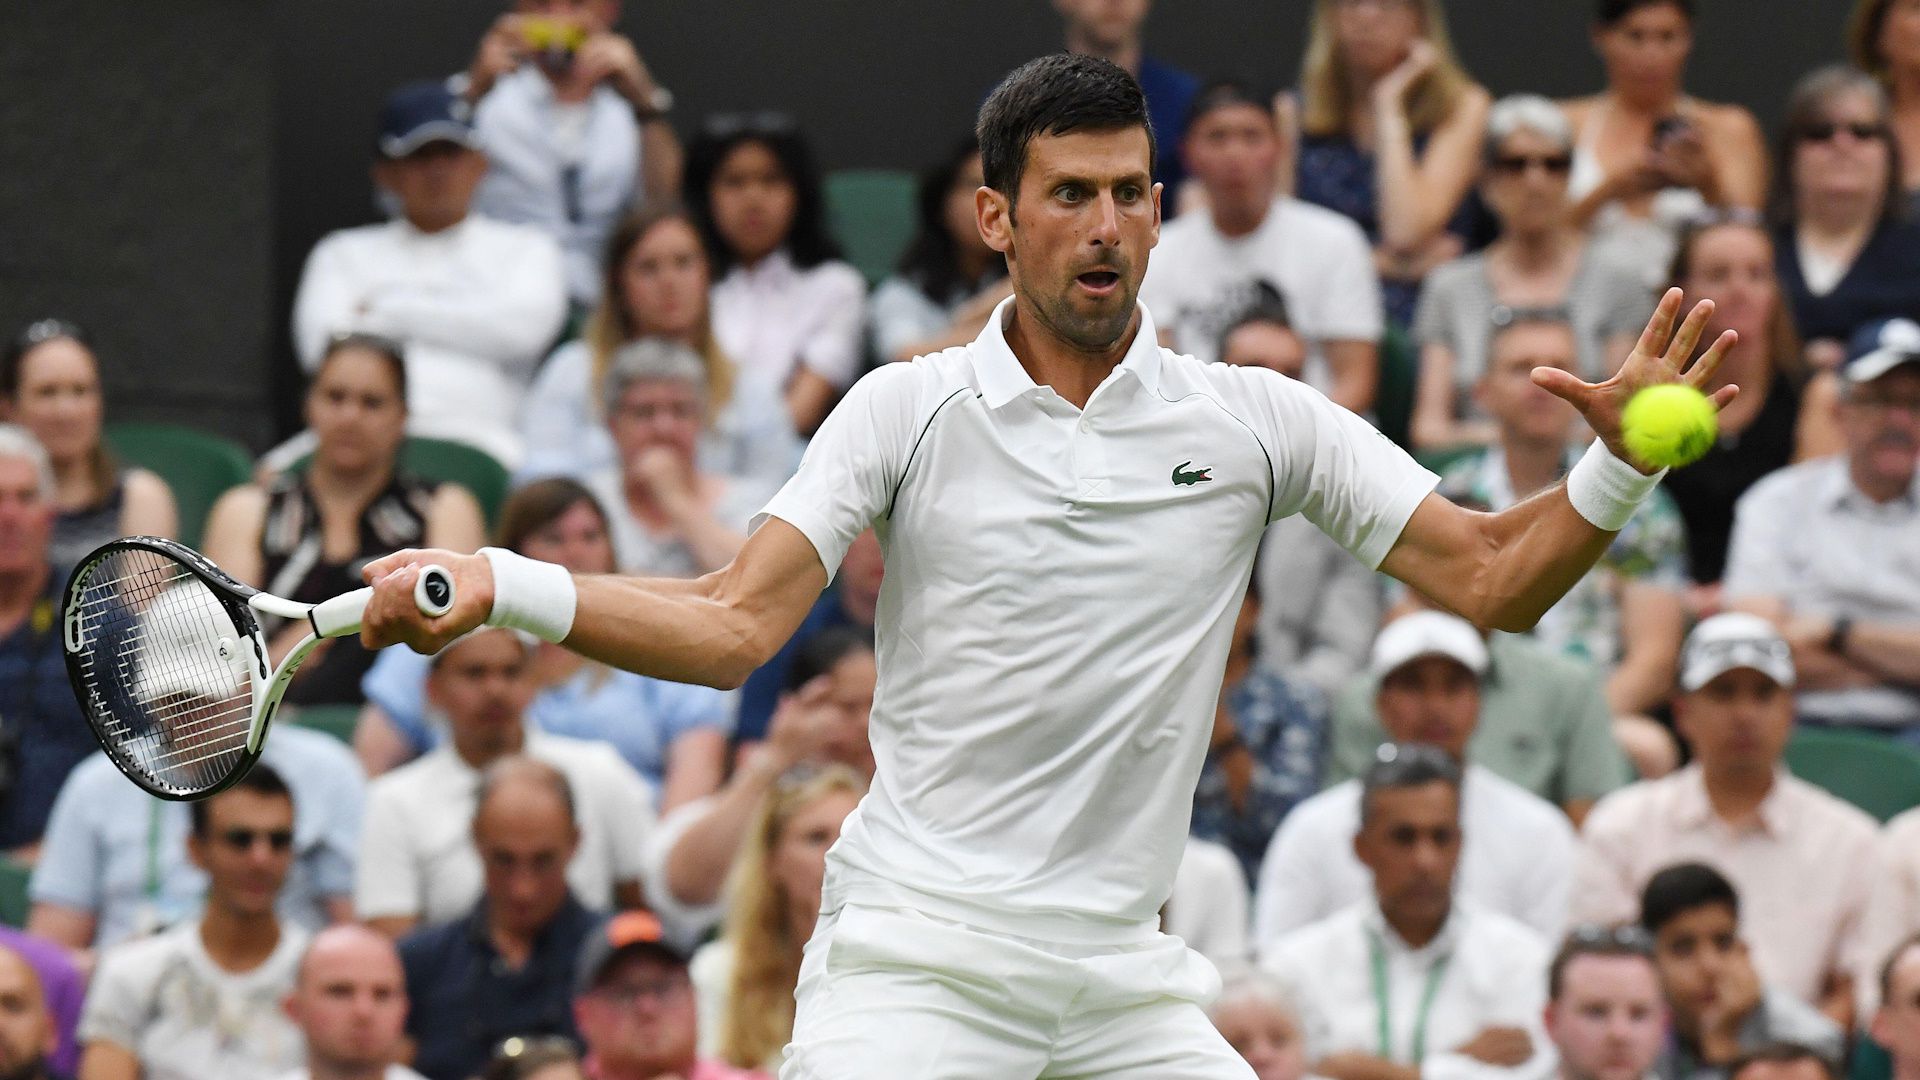 Wimbledon Mens outright predictions Young Americans could upset leading duo LiveScore